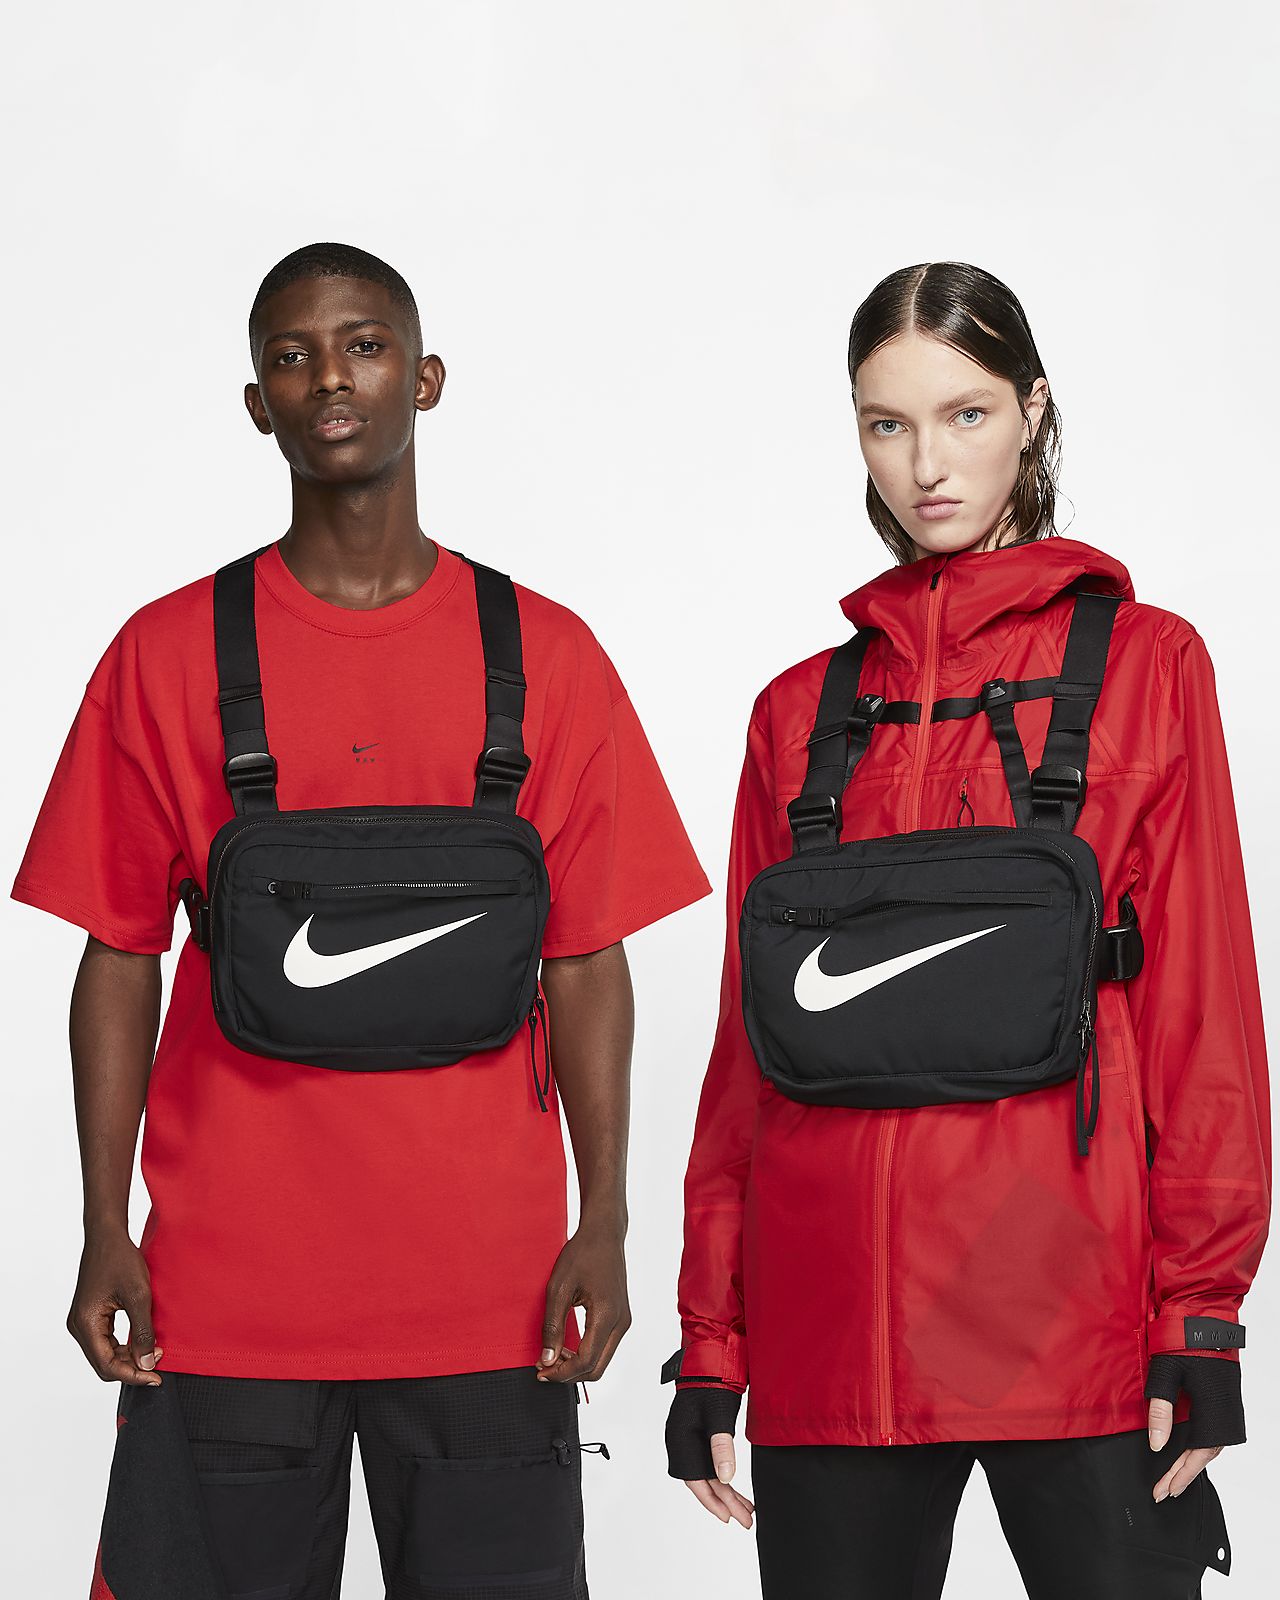 Shopping \u003e chest rig nike, Up to 71% OFF